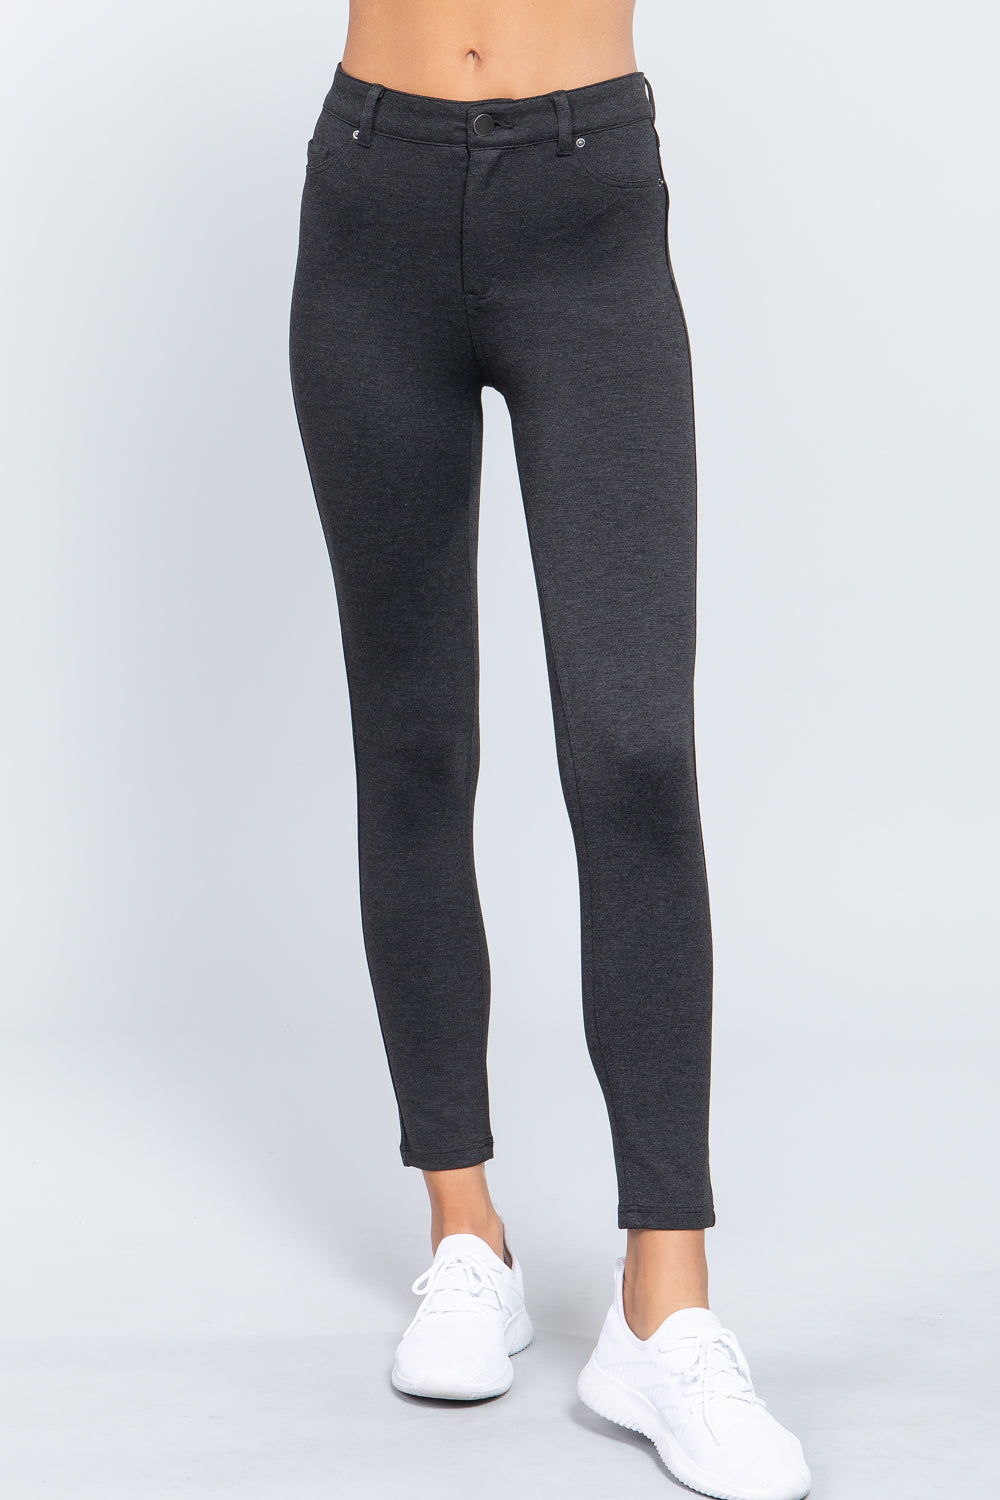 5-pockets Shape Skinny Ponte Mid-rise Pants in Charcoal Grey